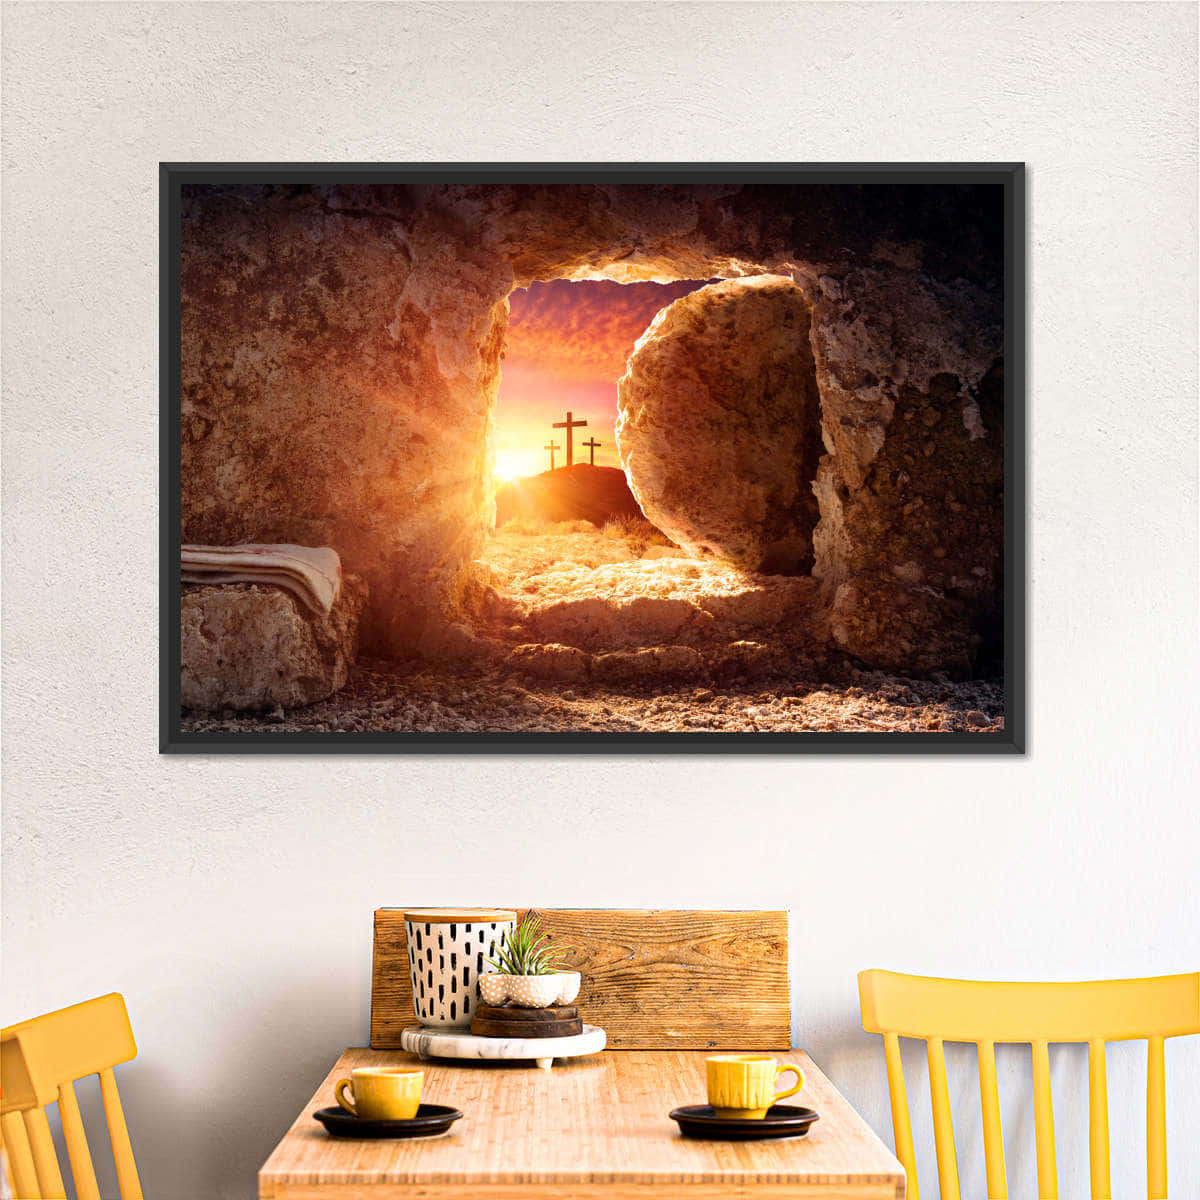 A Framed Picture Of A Crucifixion Scene